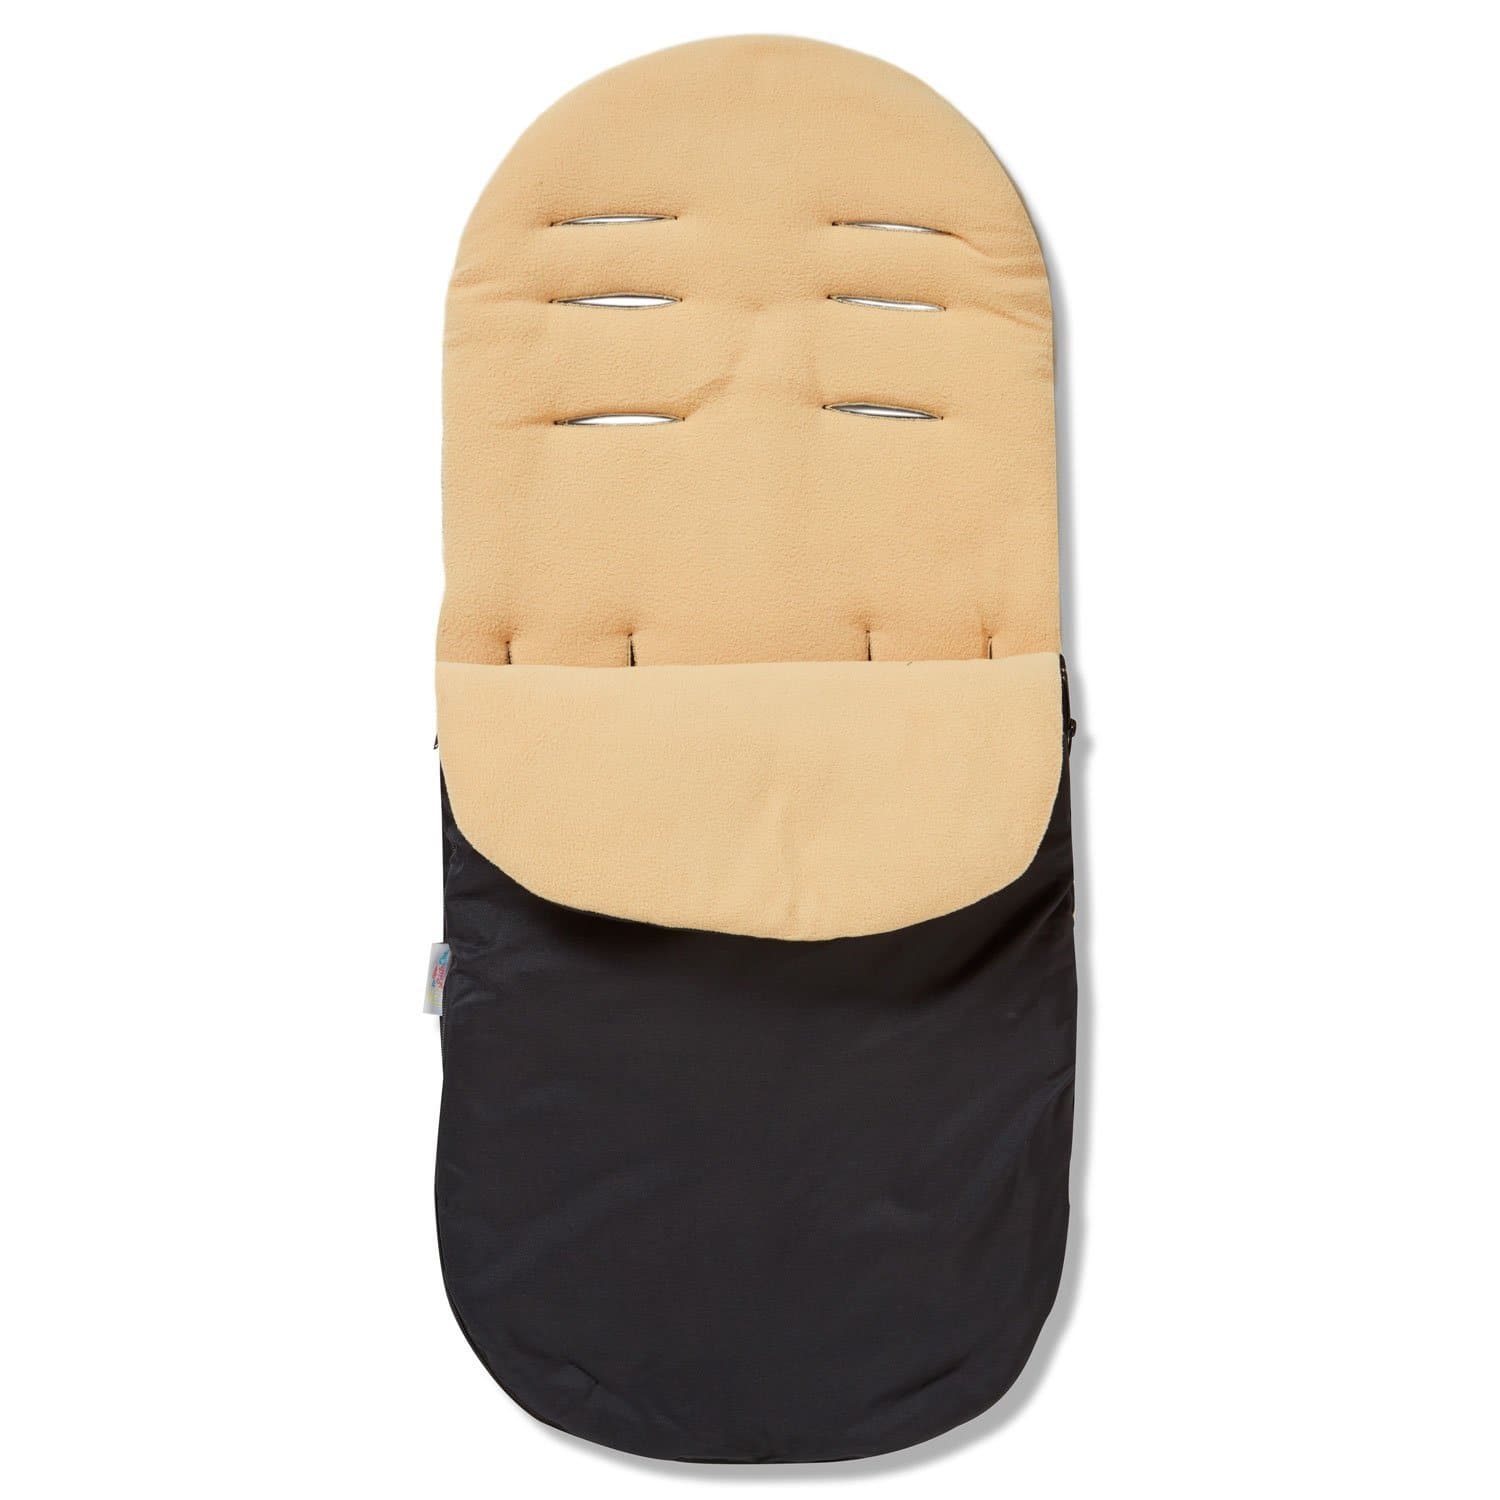 Footmuff / Cosy Toes Compatible with Phil & Teds - Sand / Fits All Models | For Your Little One